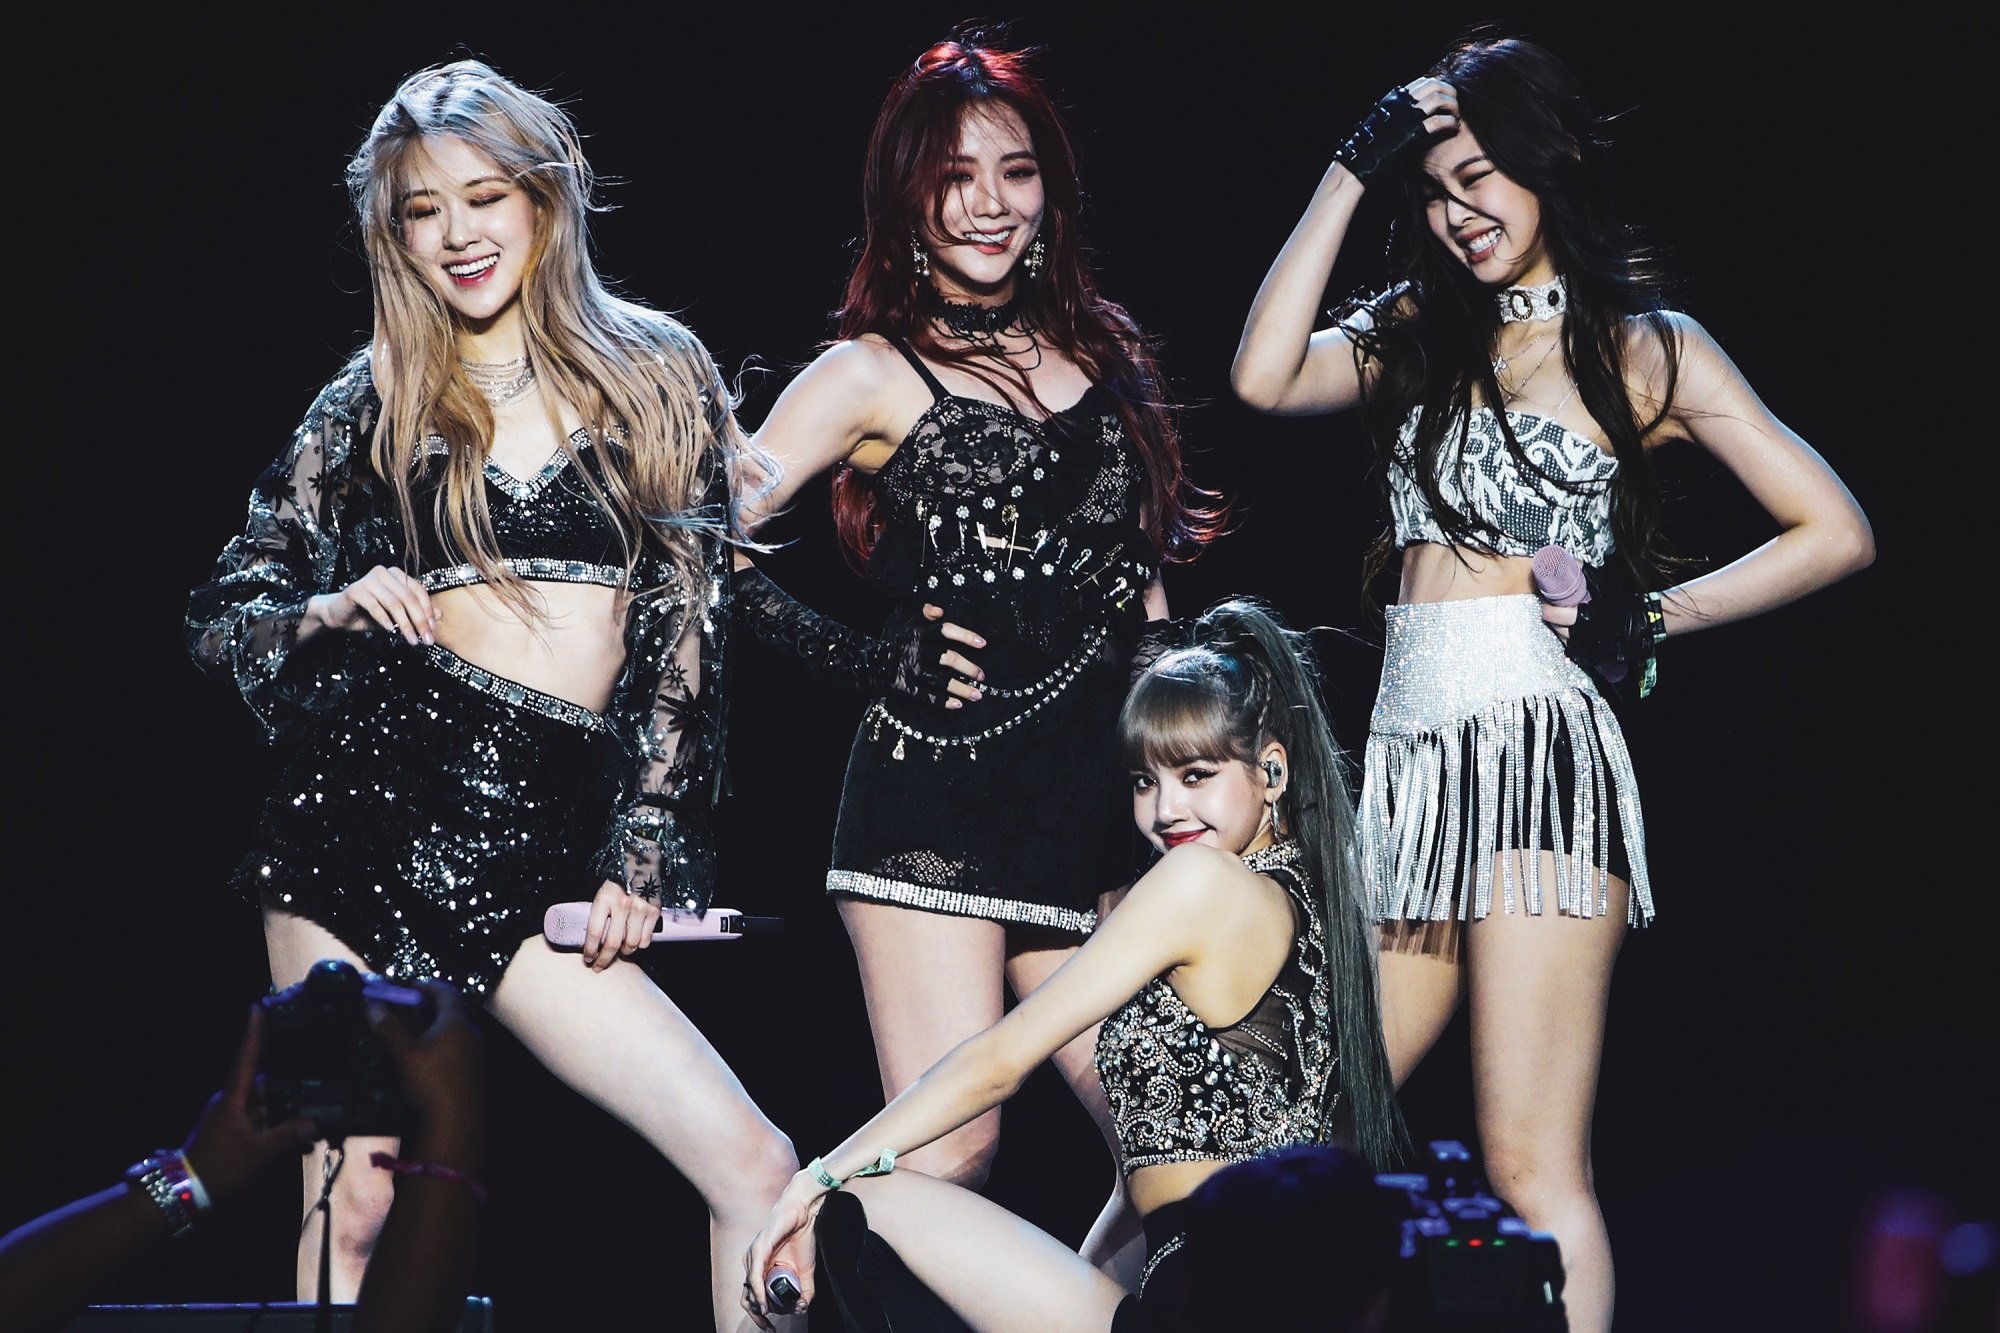 The members of BLACKPINK perform during the 2019 Coachella Valley Music And Arts Festival